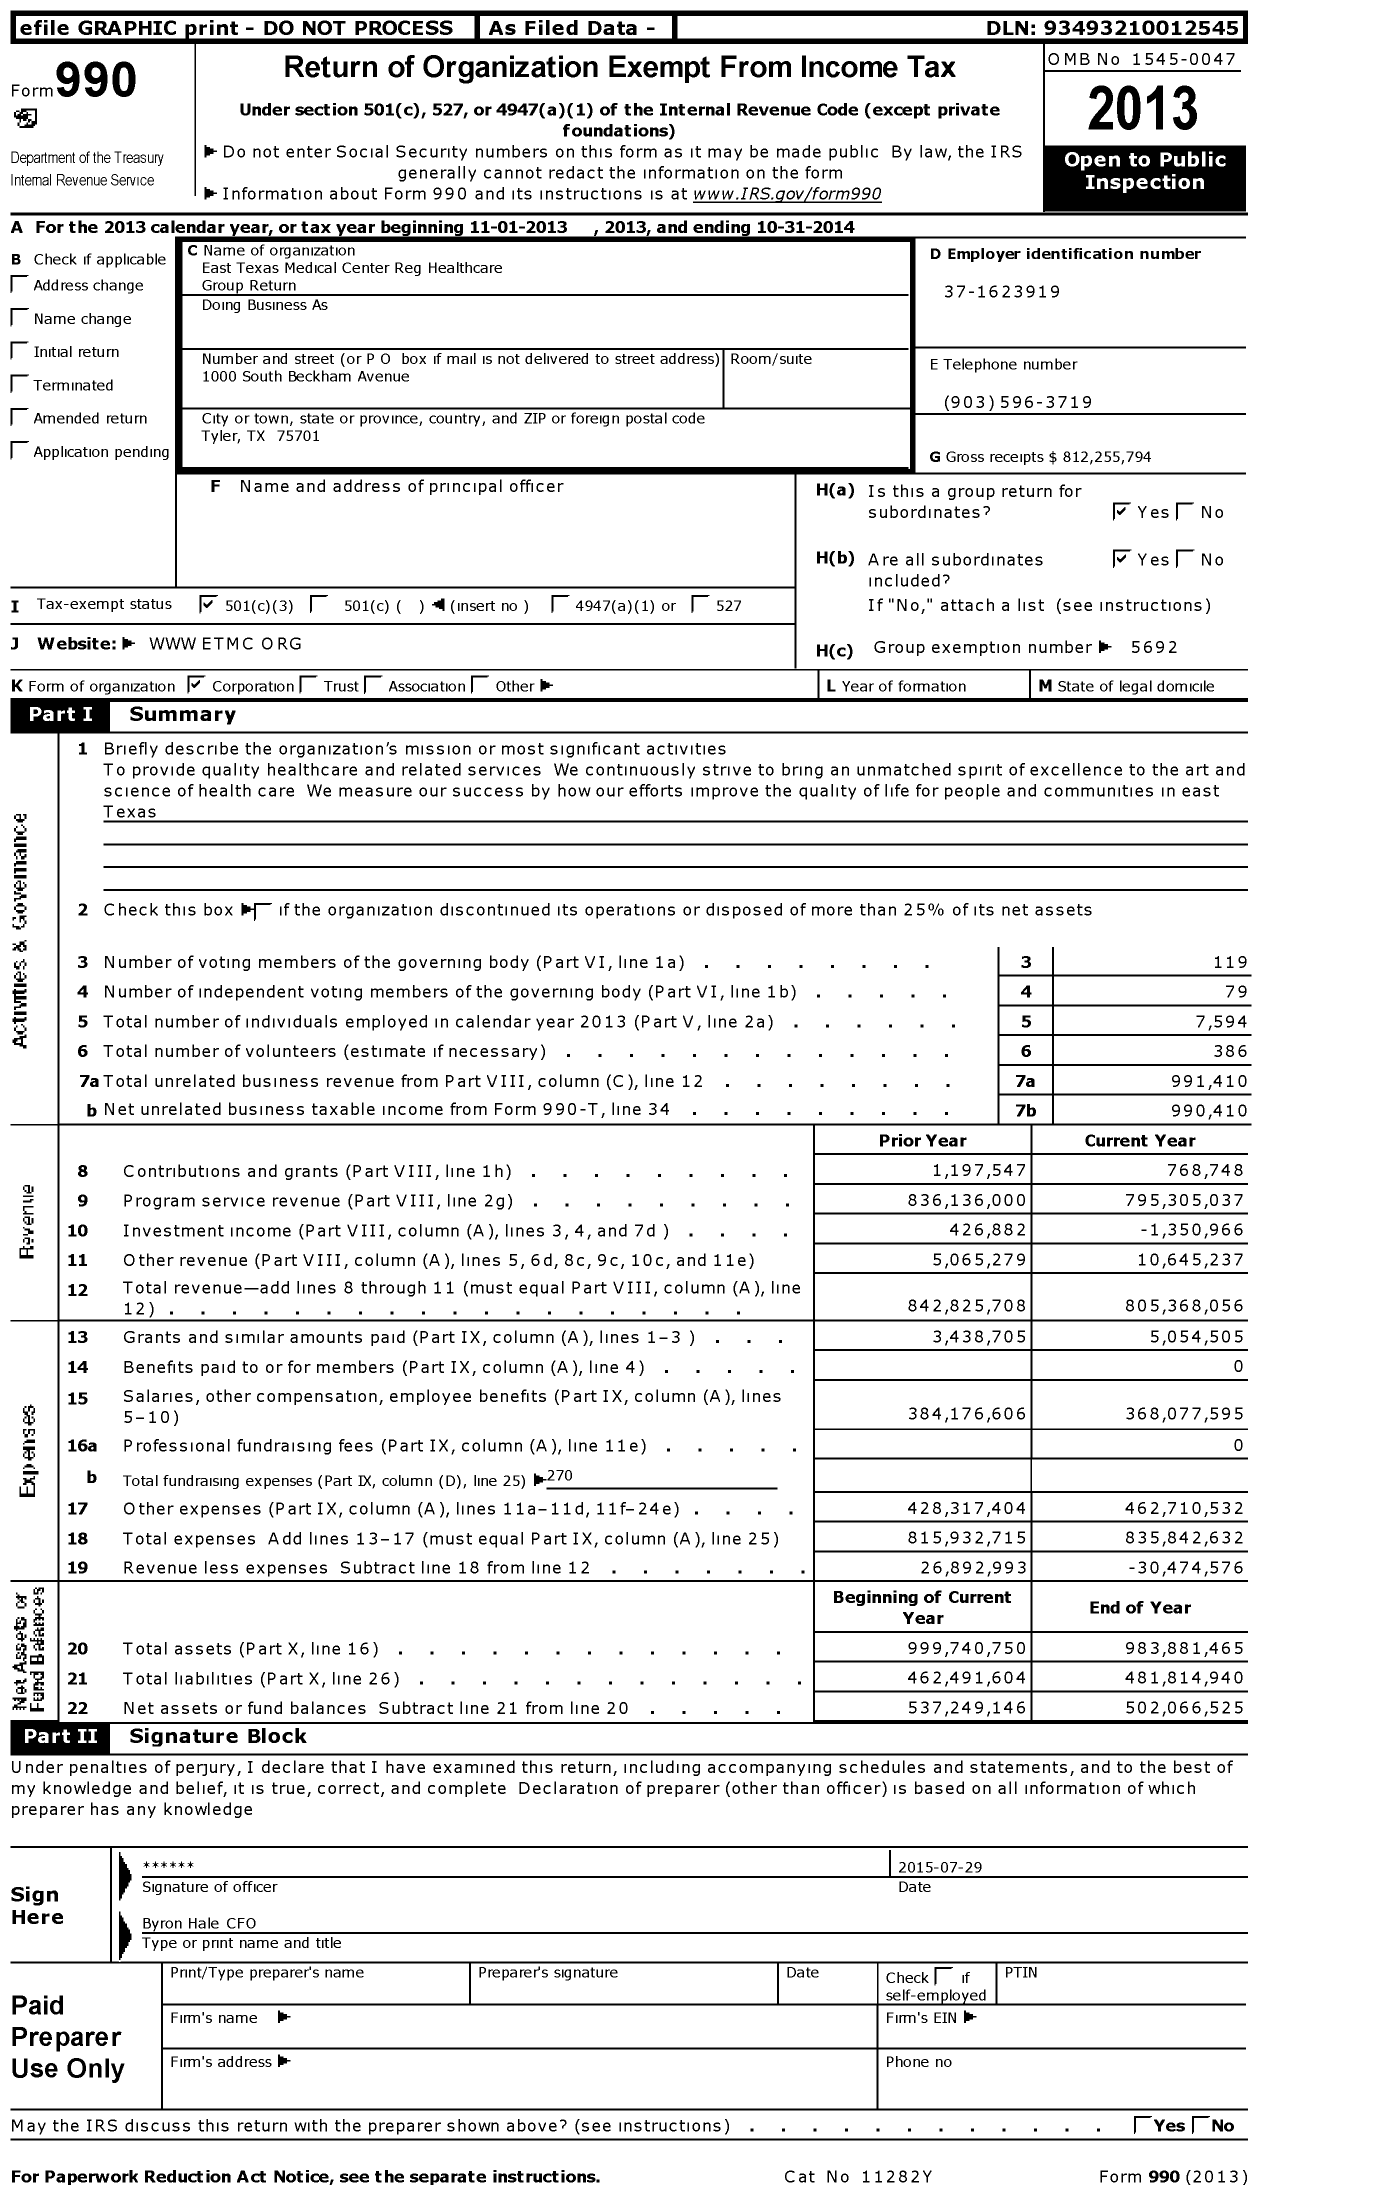 Image of first page of 2013 Form 990 for East Texas Medical Center Reg Healthcare Group Return